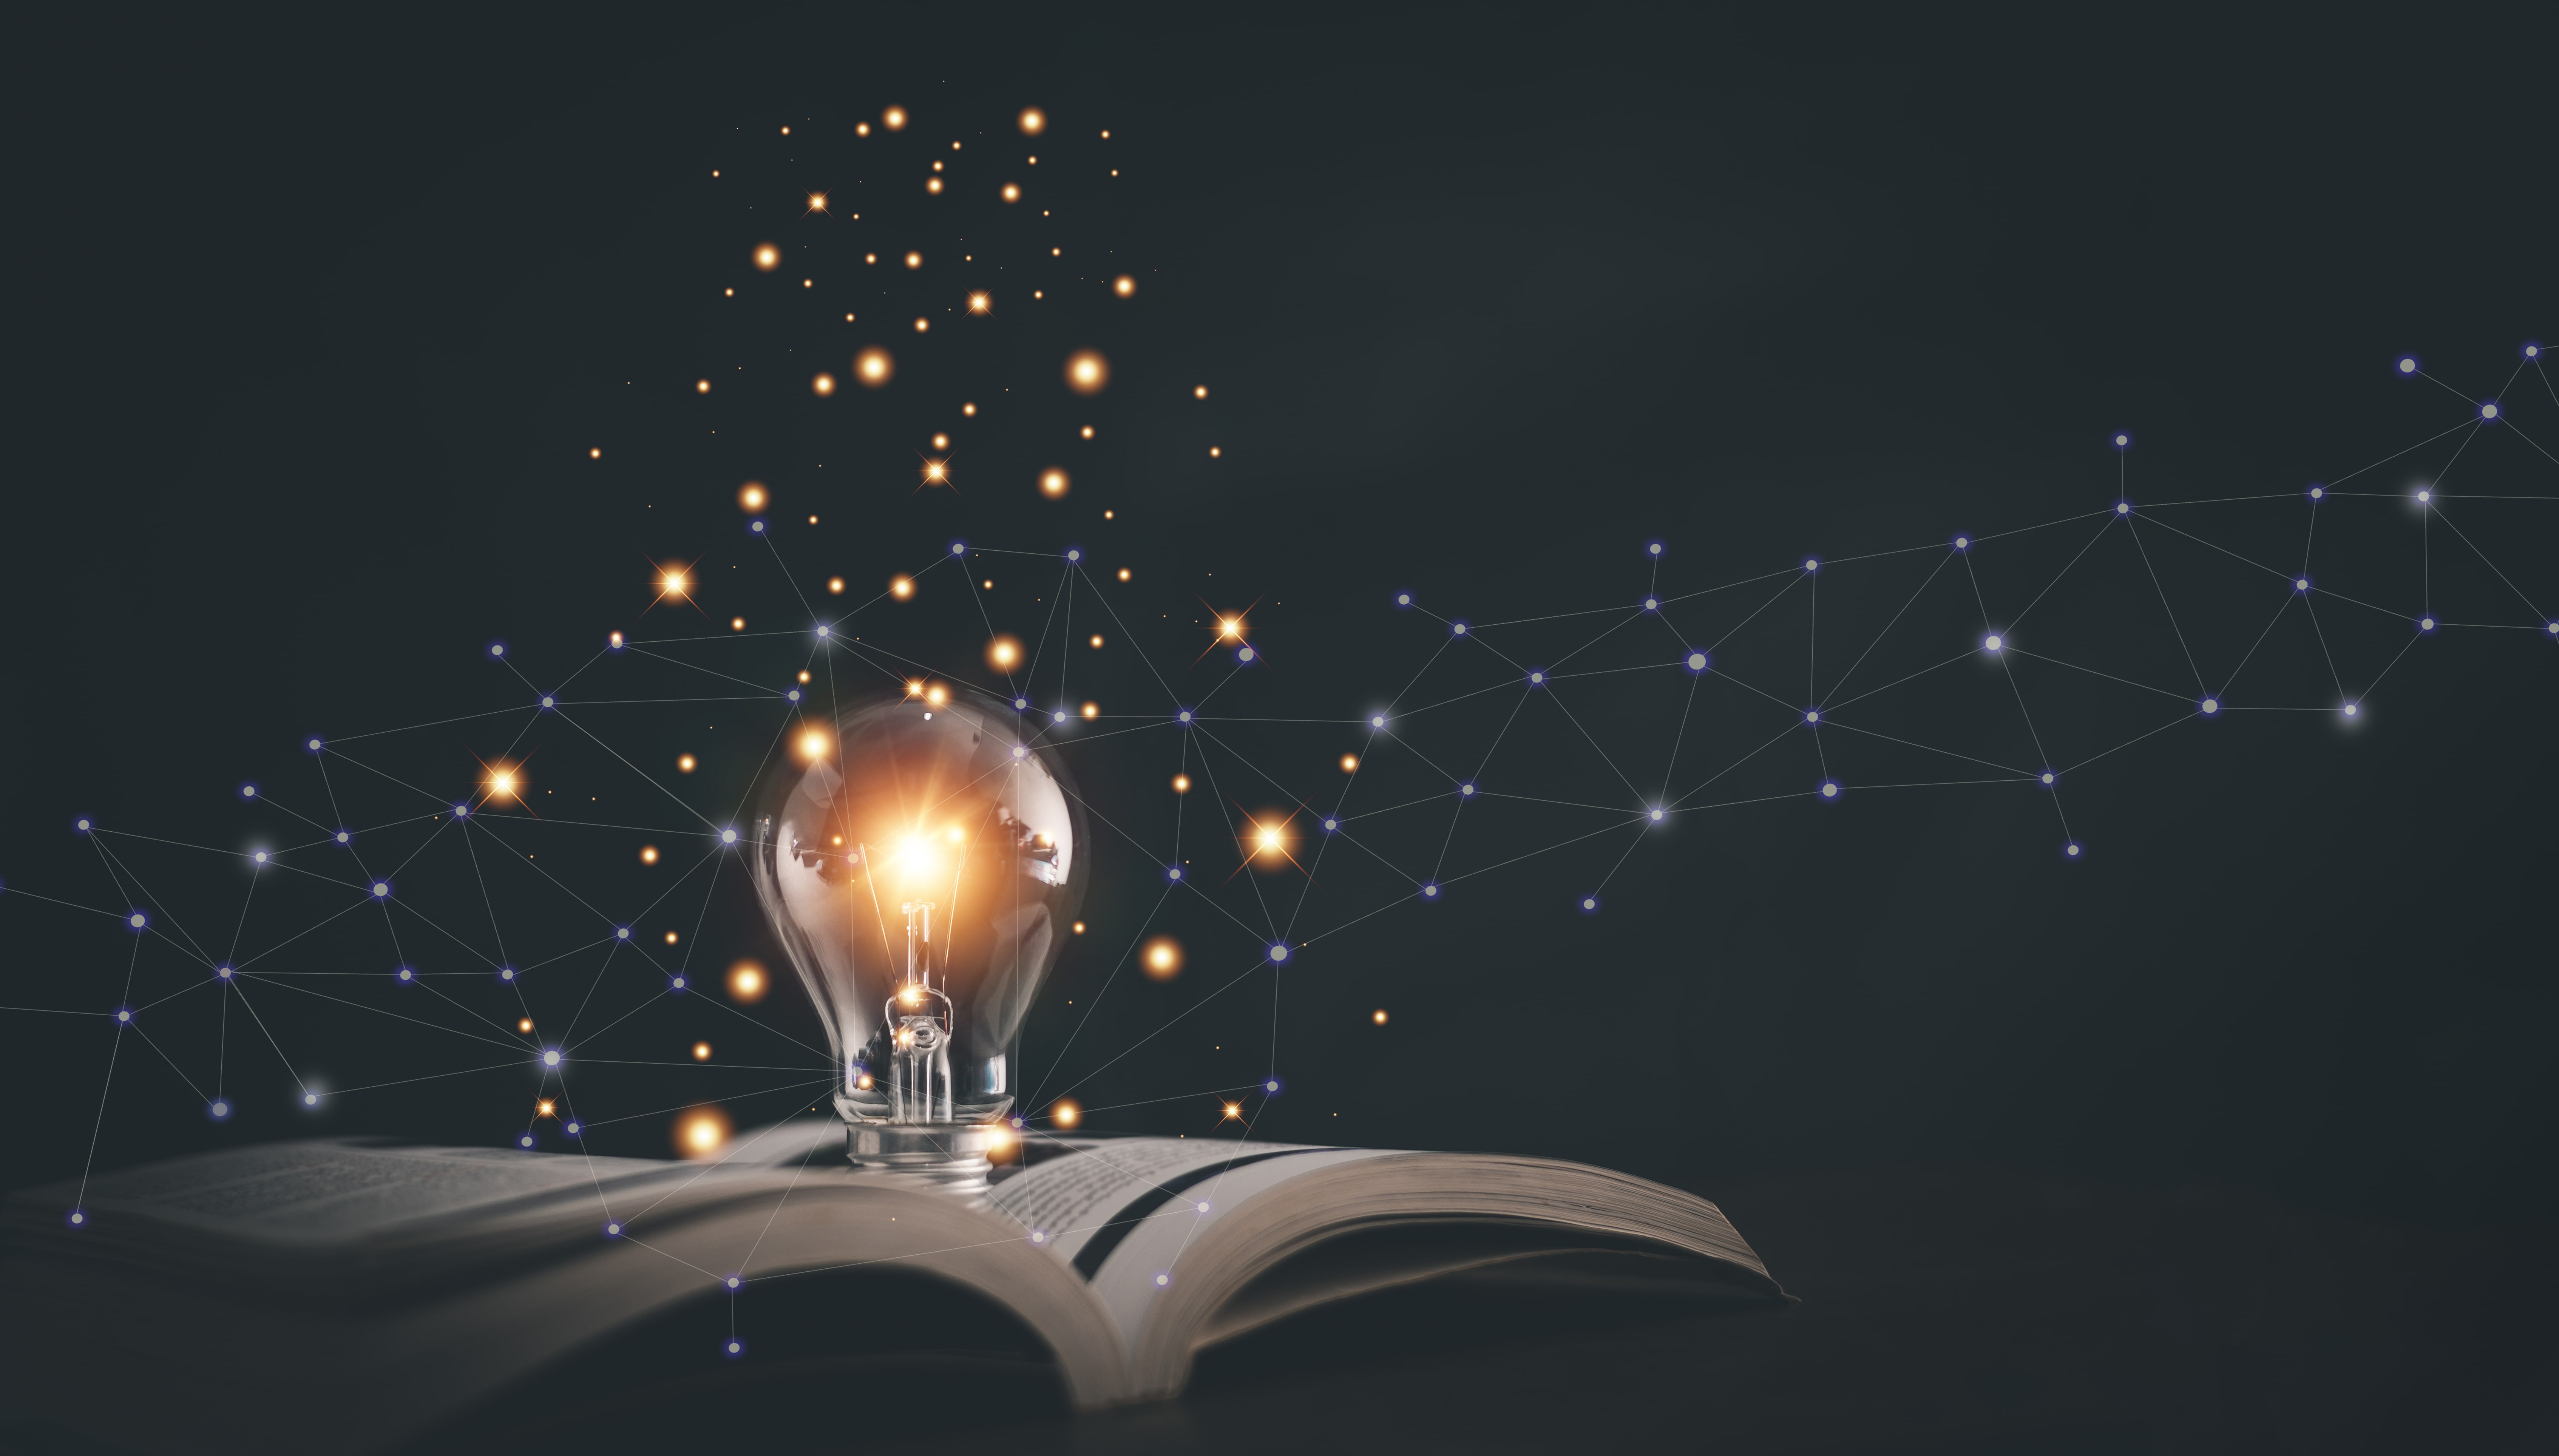 A glowing lightbulb sits on the open pages of a book and emits sprinkles of light. A constellation of light expands across the centre of the black background.